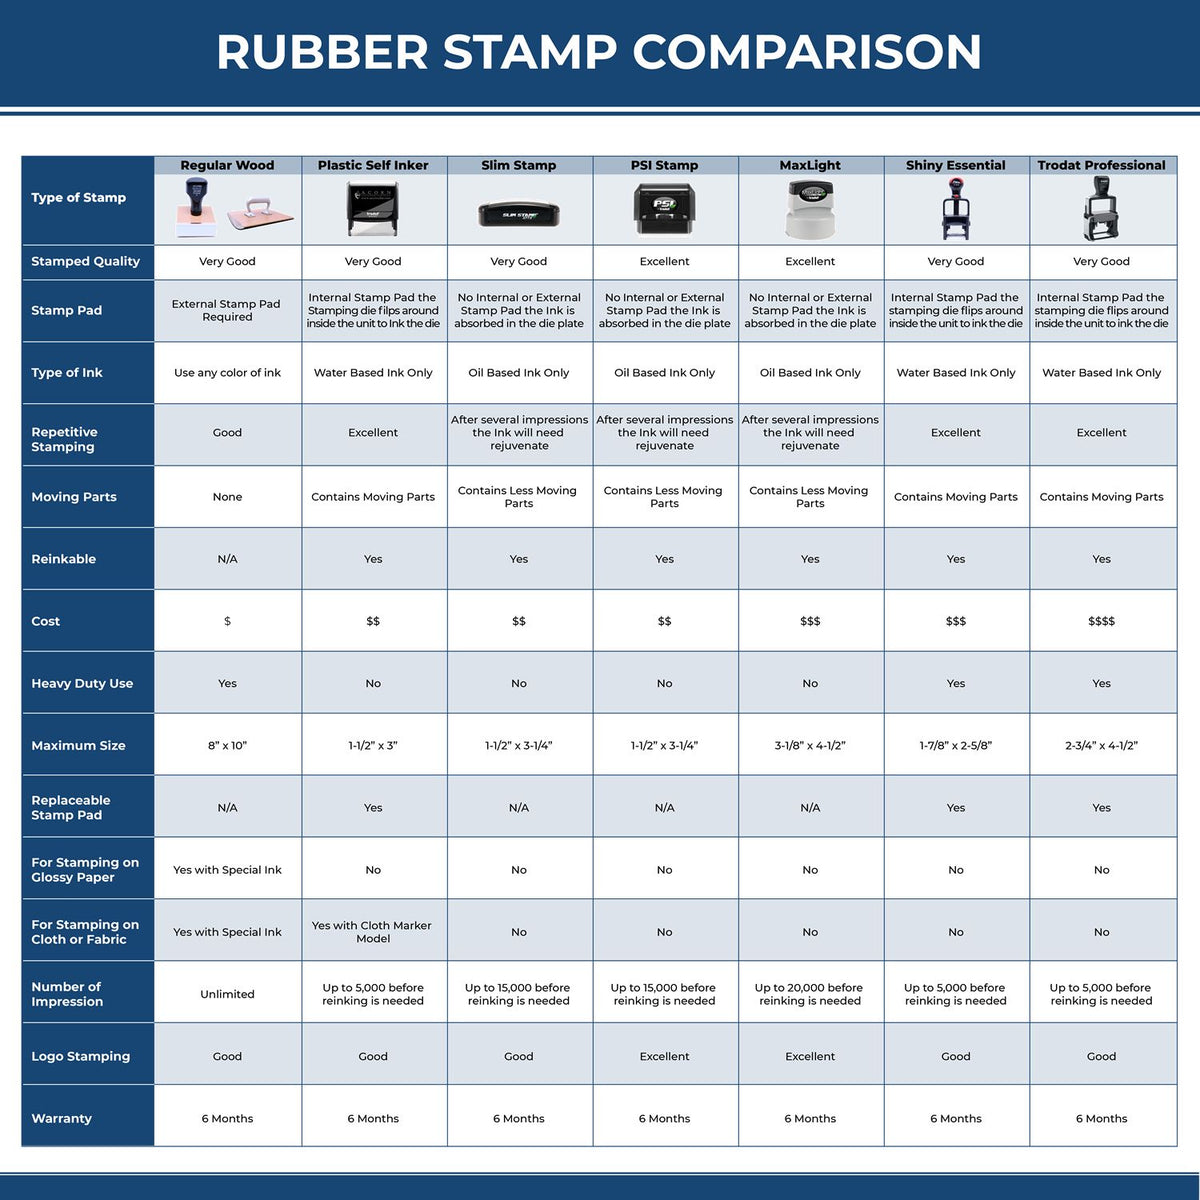 A comparison chart for the different types of mount models available for the Premium MaxLight Pre-Inked Texas Engineering Stamp.